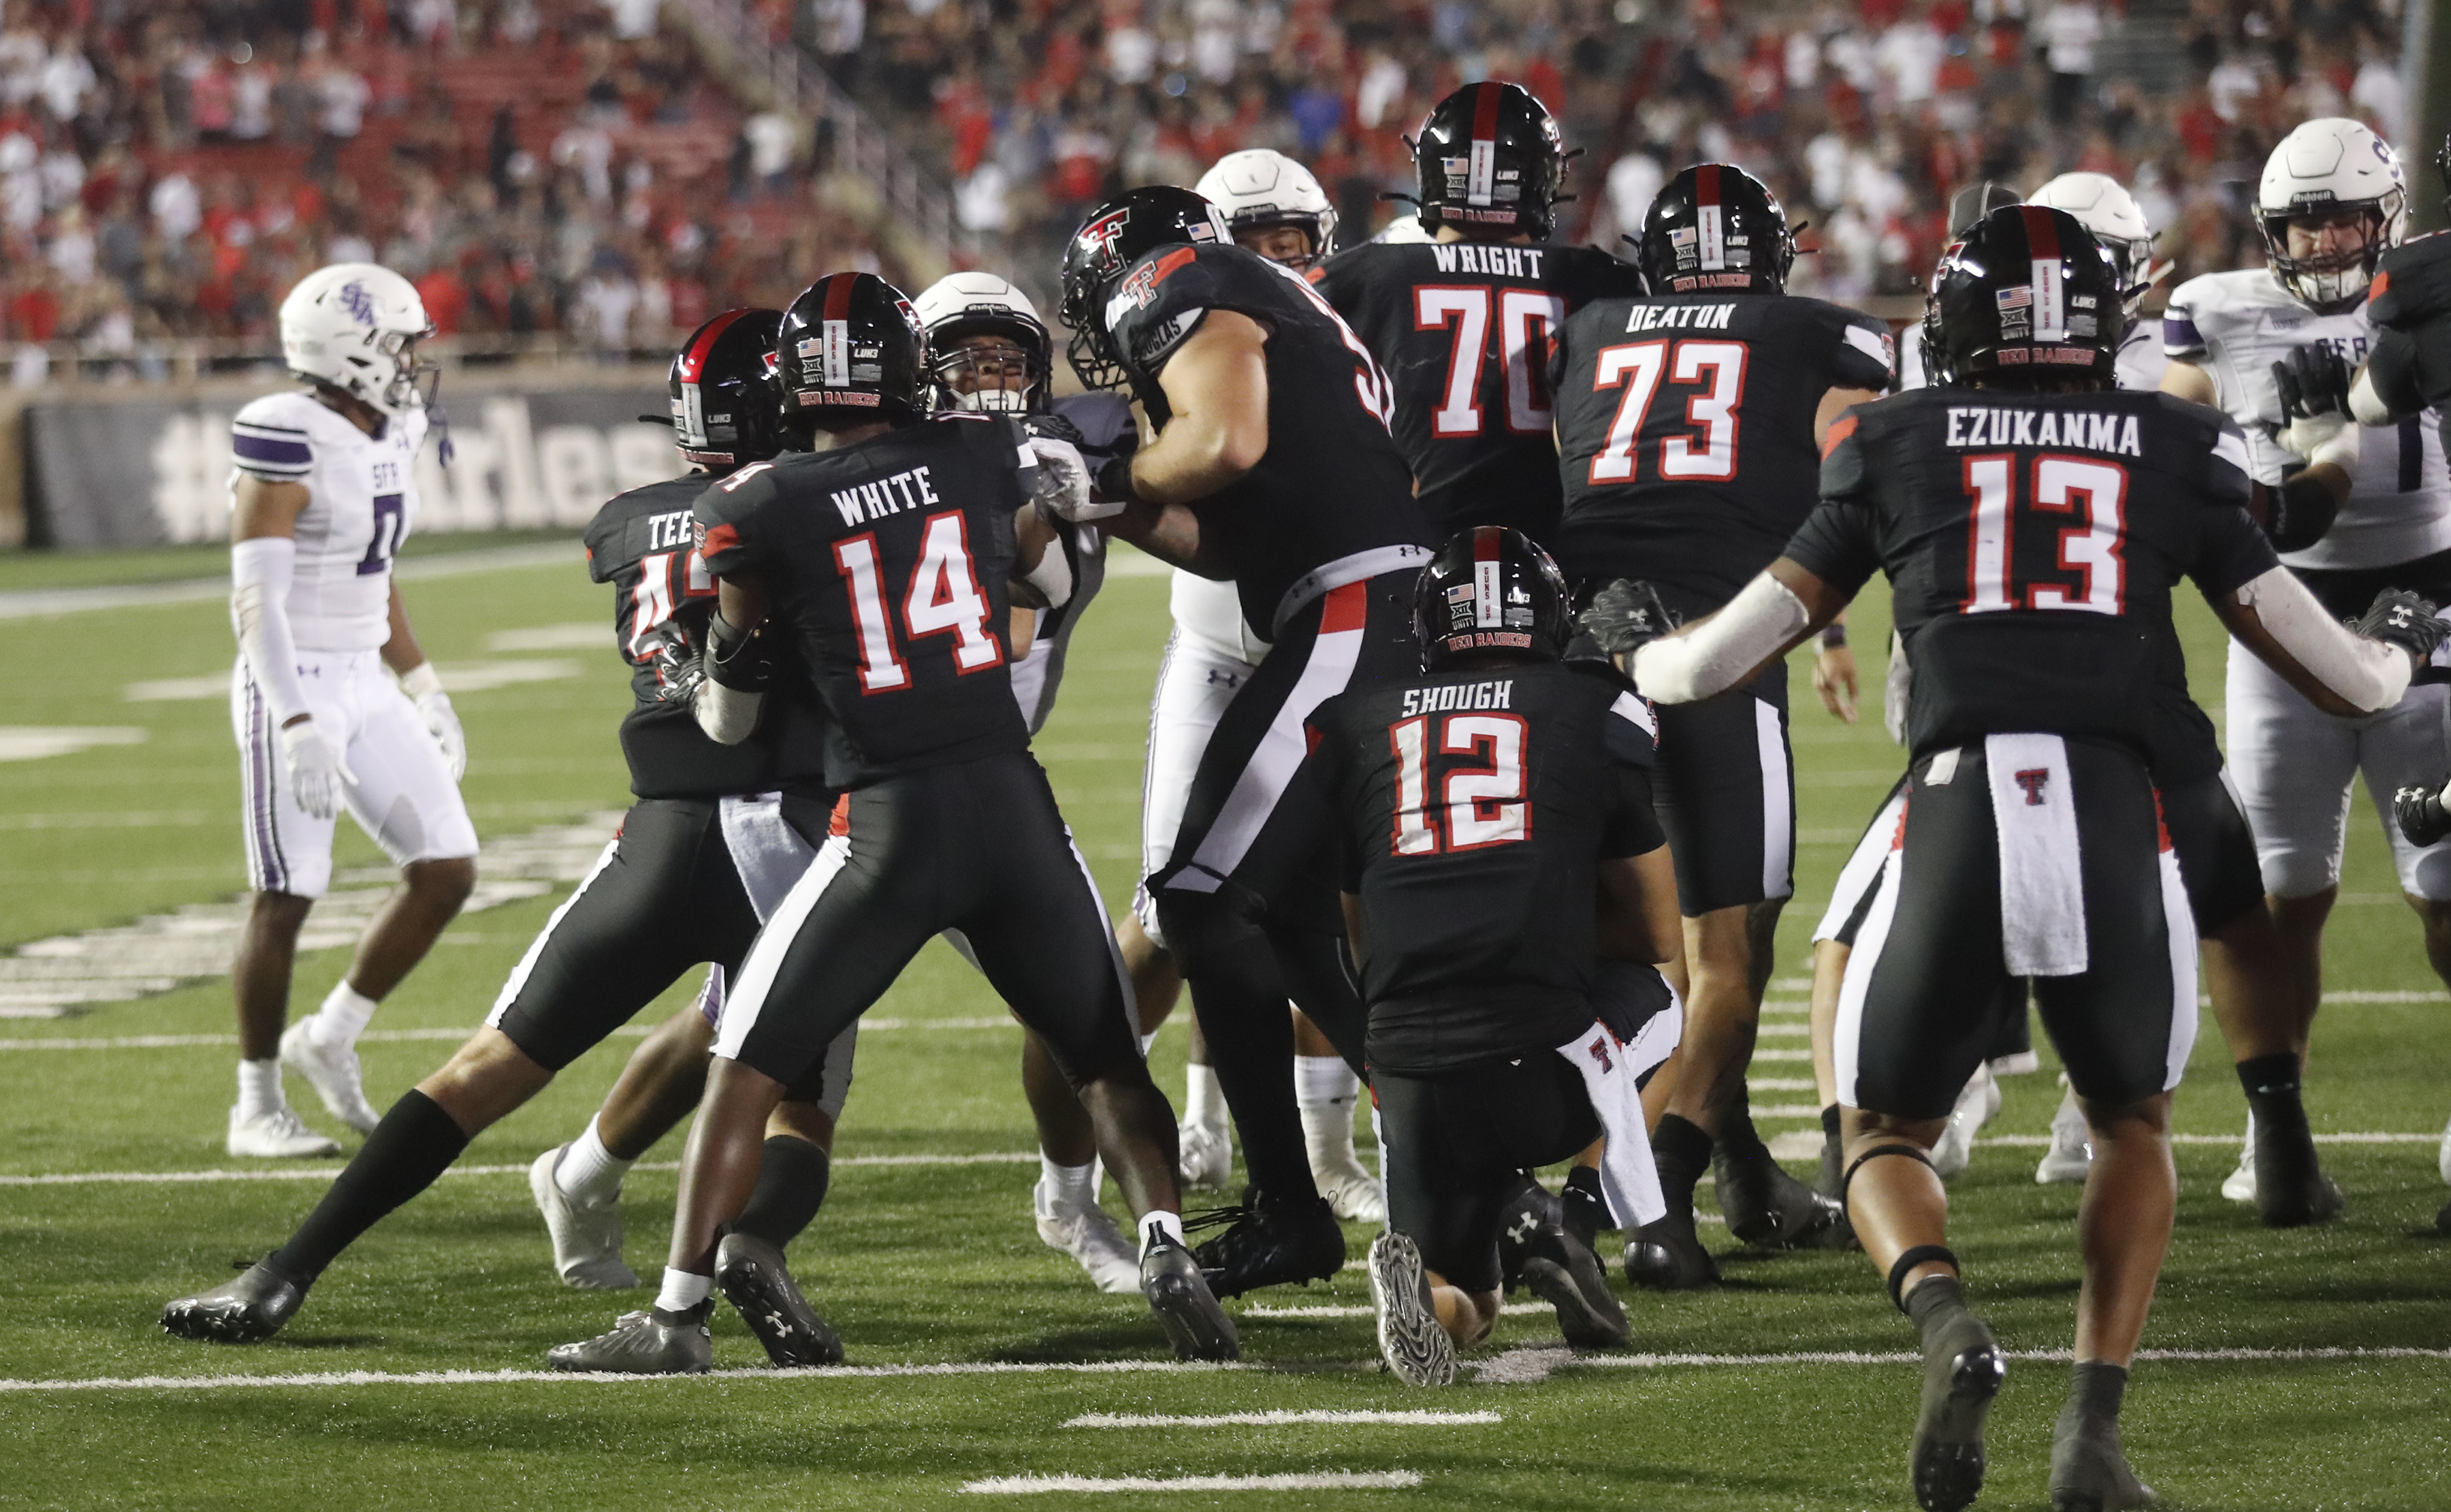 RED RAIDER PODCAST: Tech is 2-0, should we feel good?